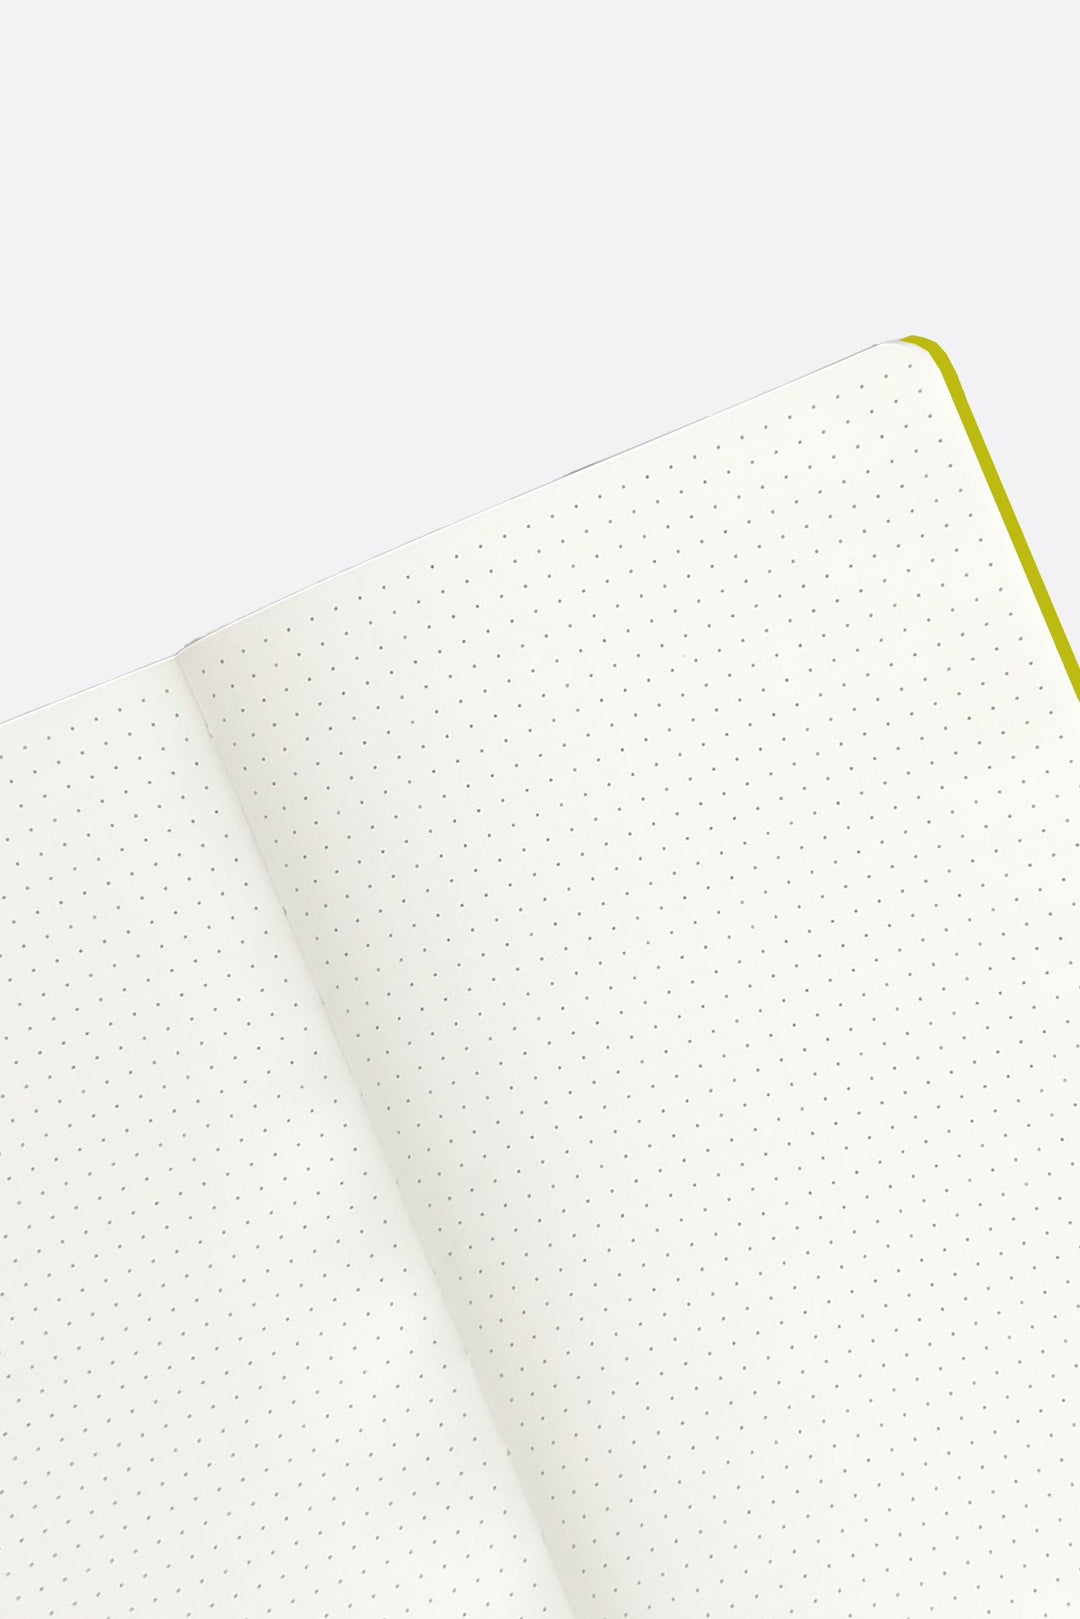 Cocktail Softcover Notebook